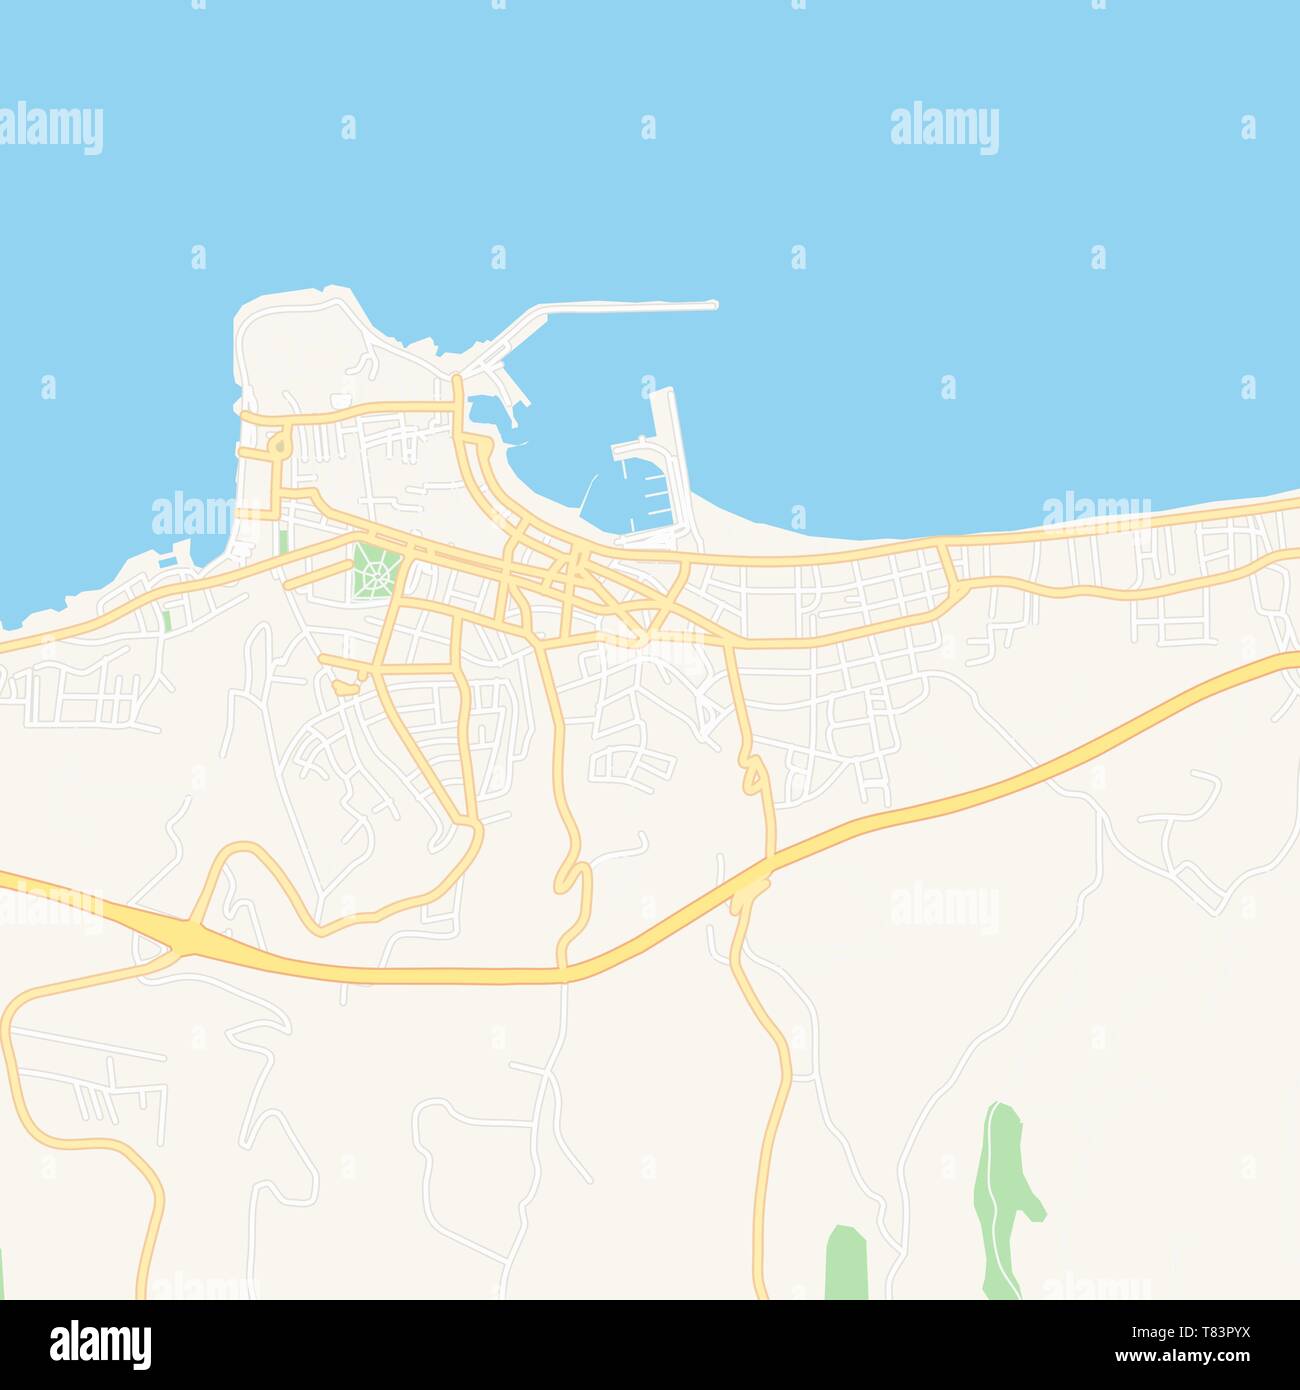 Printable map of Rethymno, Greece with main and secondary roads and larger railways. This map is carefully designed for routing and placing individual Stock Vector